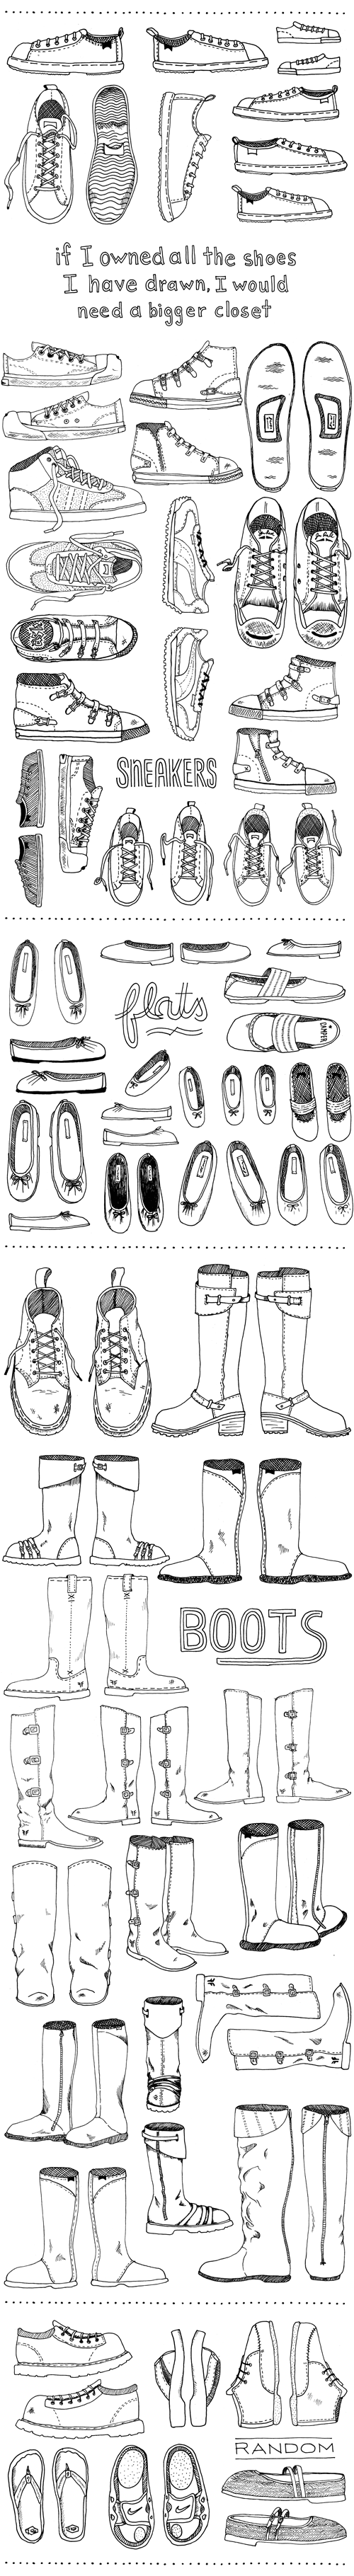 all sorts of black and white shoe illustrations in pen